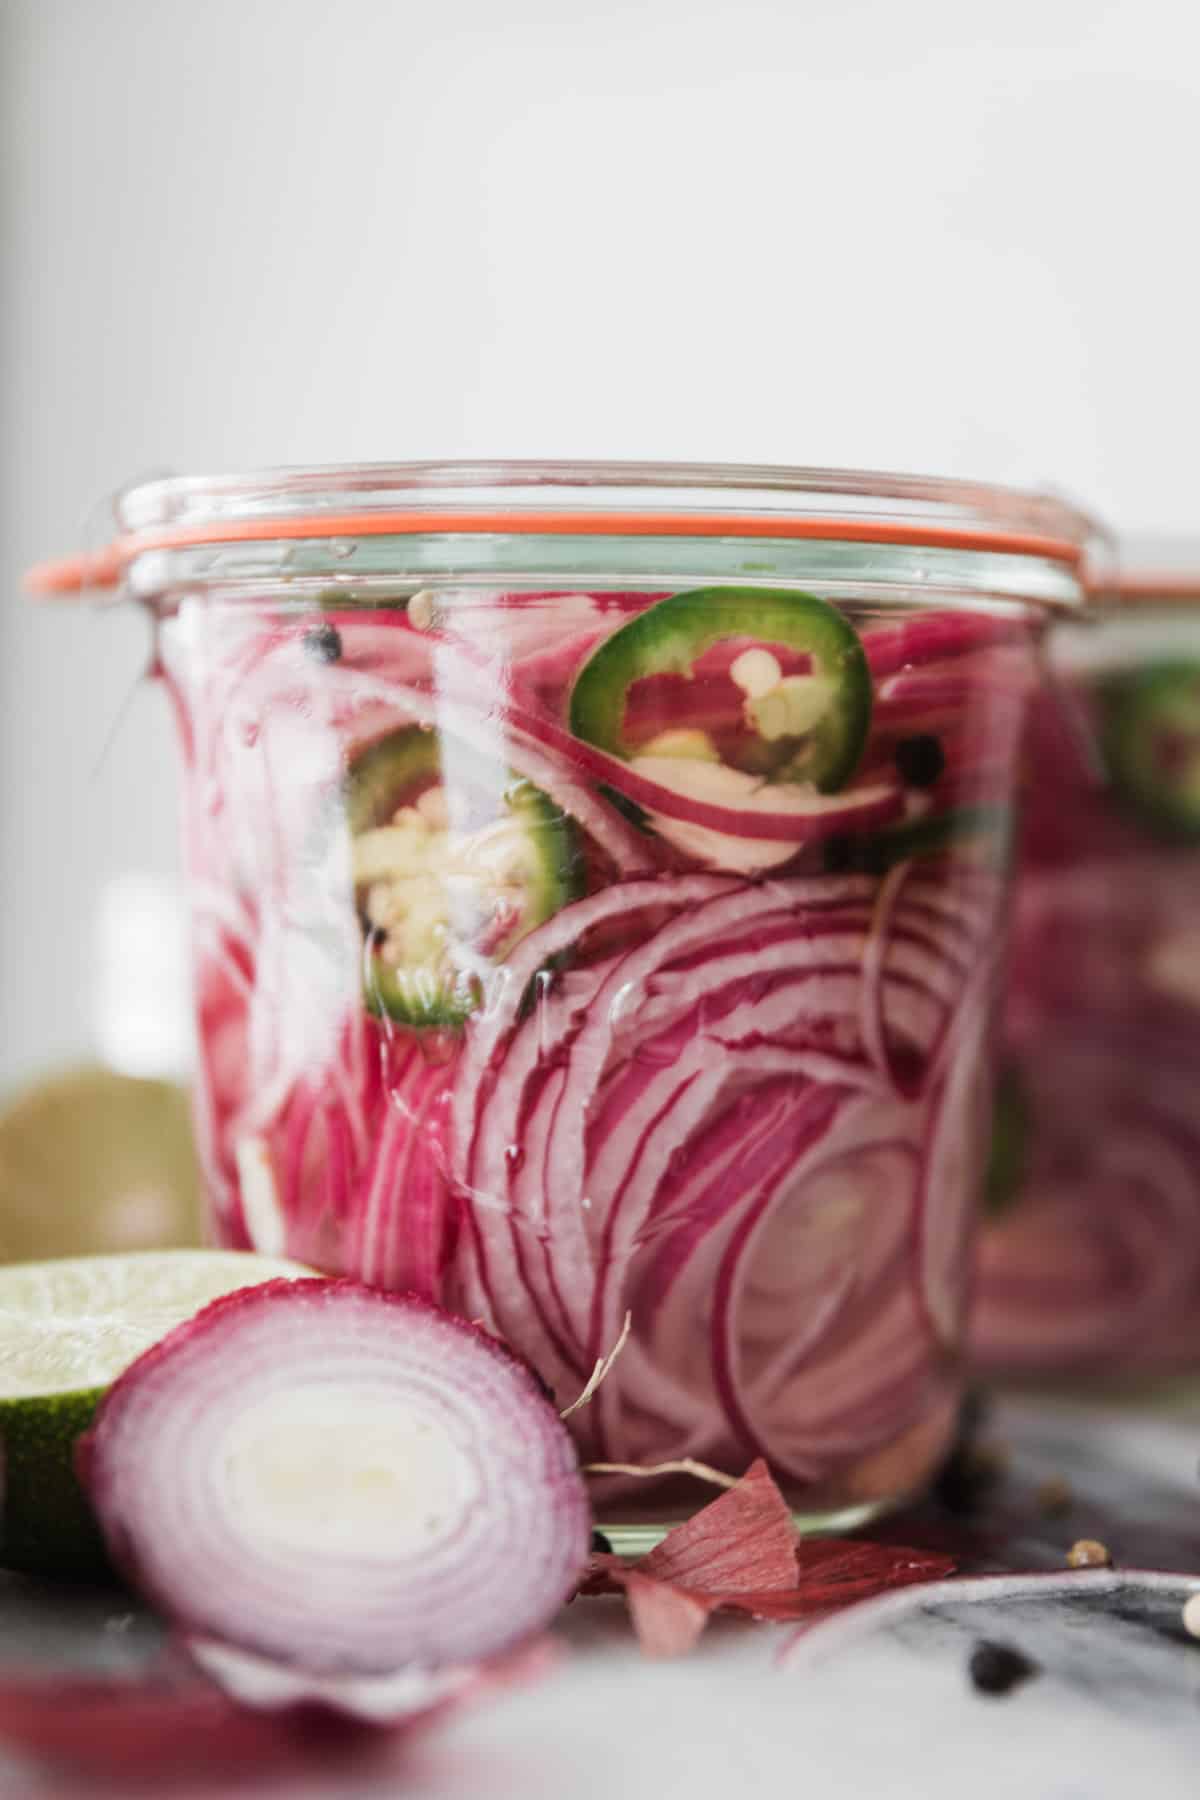 A glass jar of thinly sliced onions, spices and vinegar and sealed.